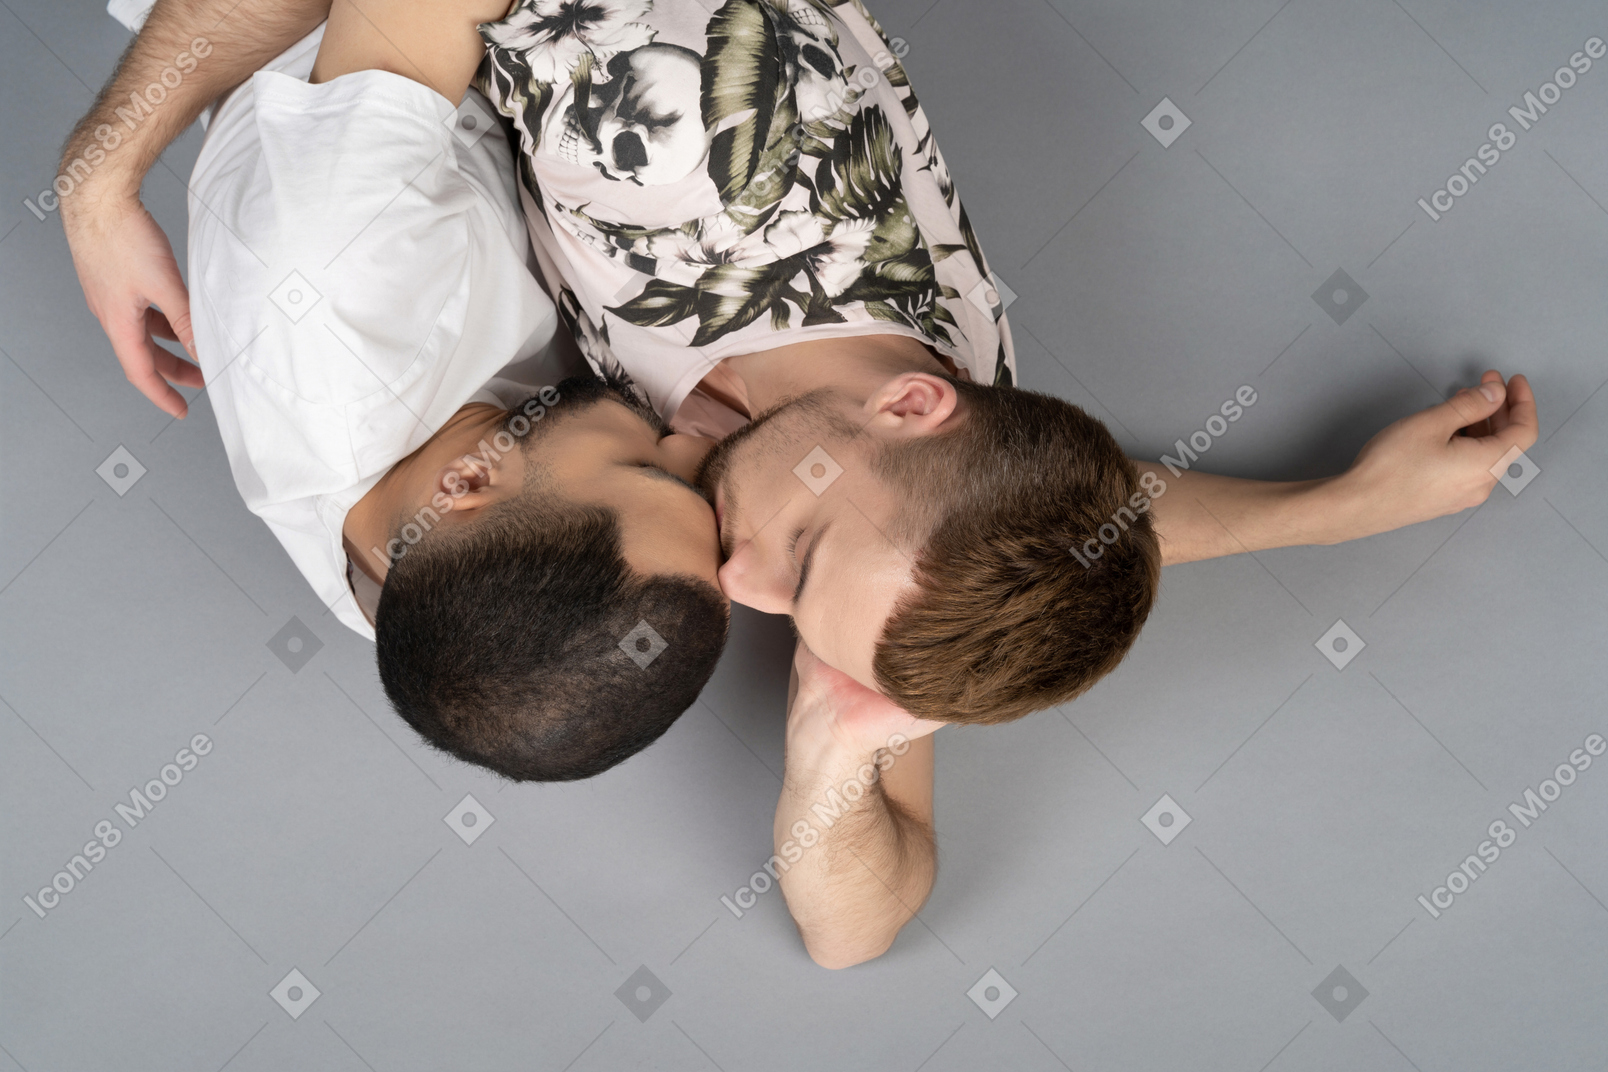 Flat lay of two young caucasian men lying on the floor one kissing another's forehead